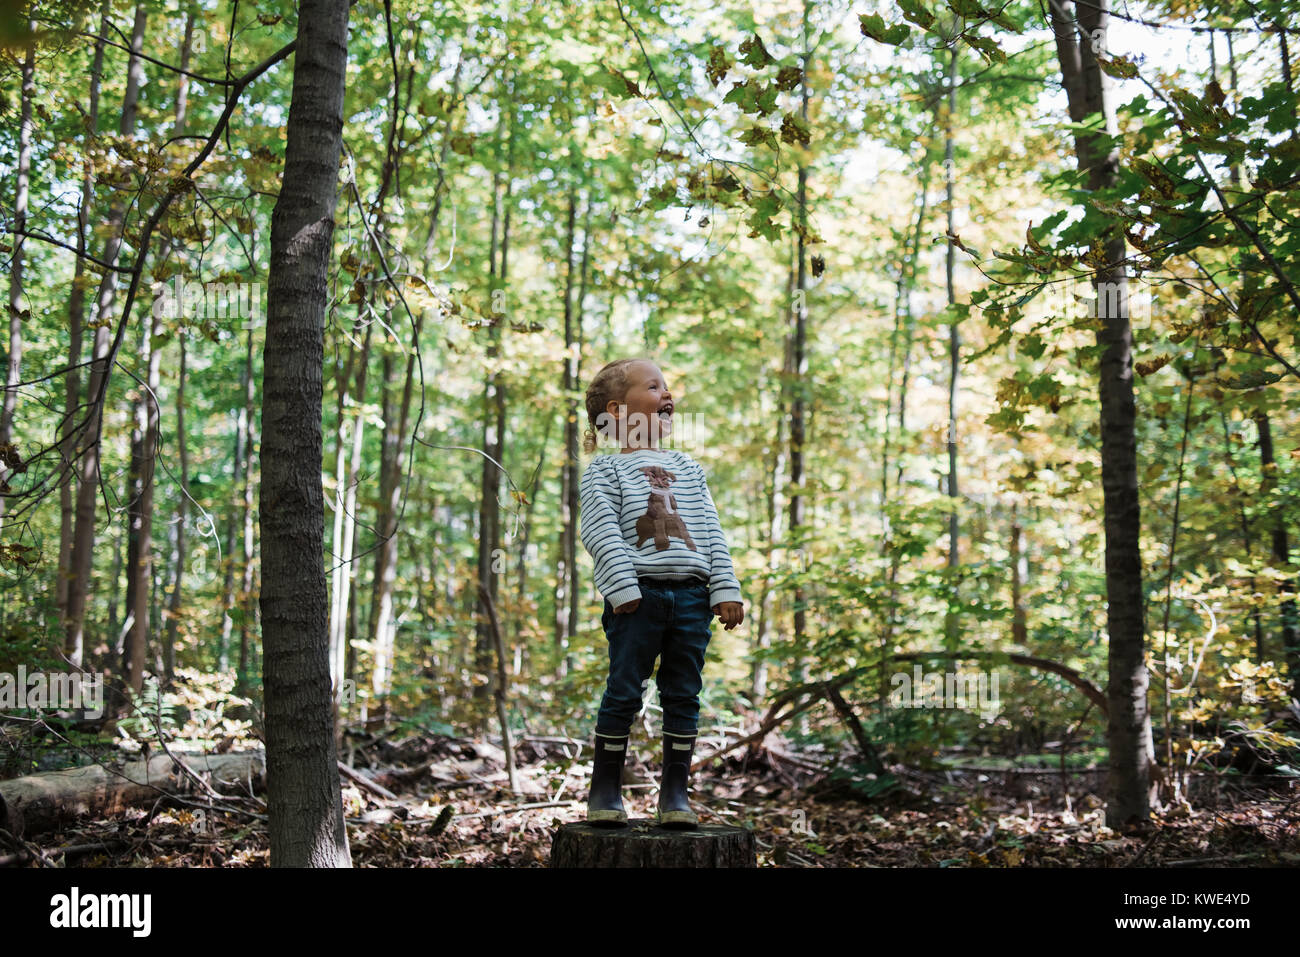 Playful girl shouting while standing on tree stump amidst forest Stock Photo